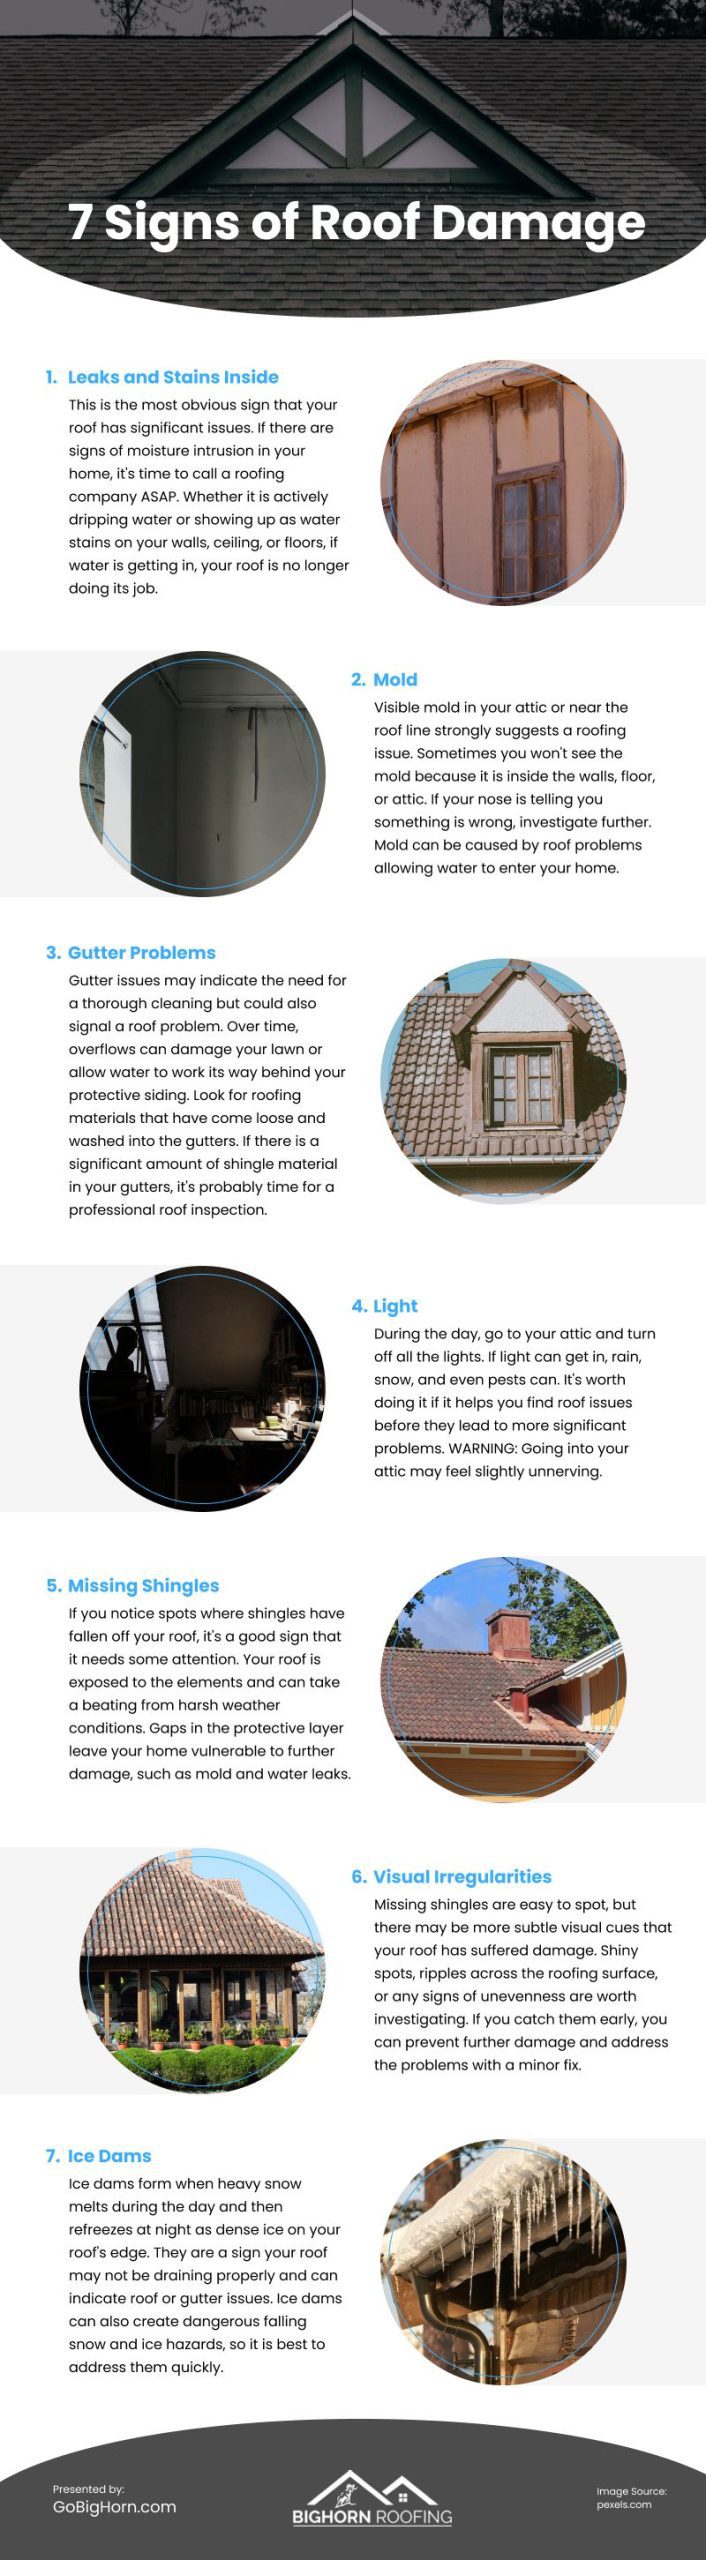 7 Signs of Roof Damage Infographic